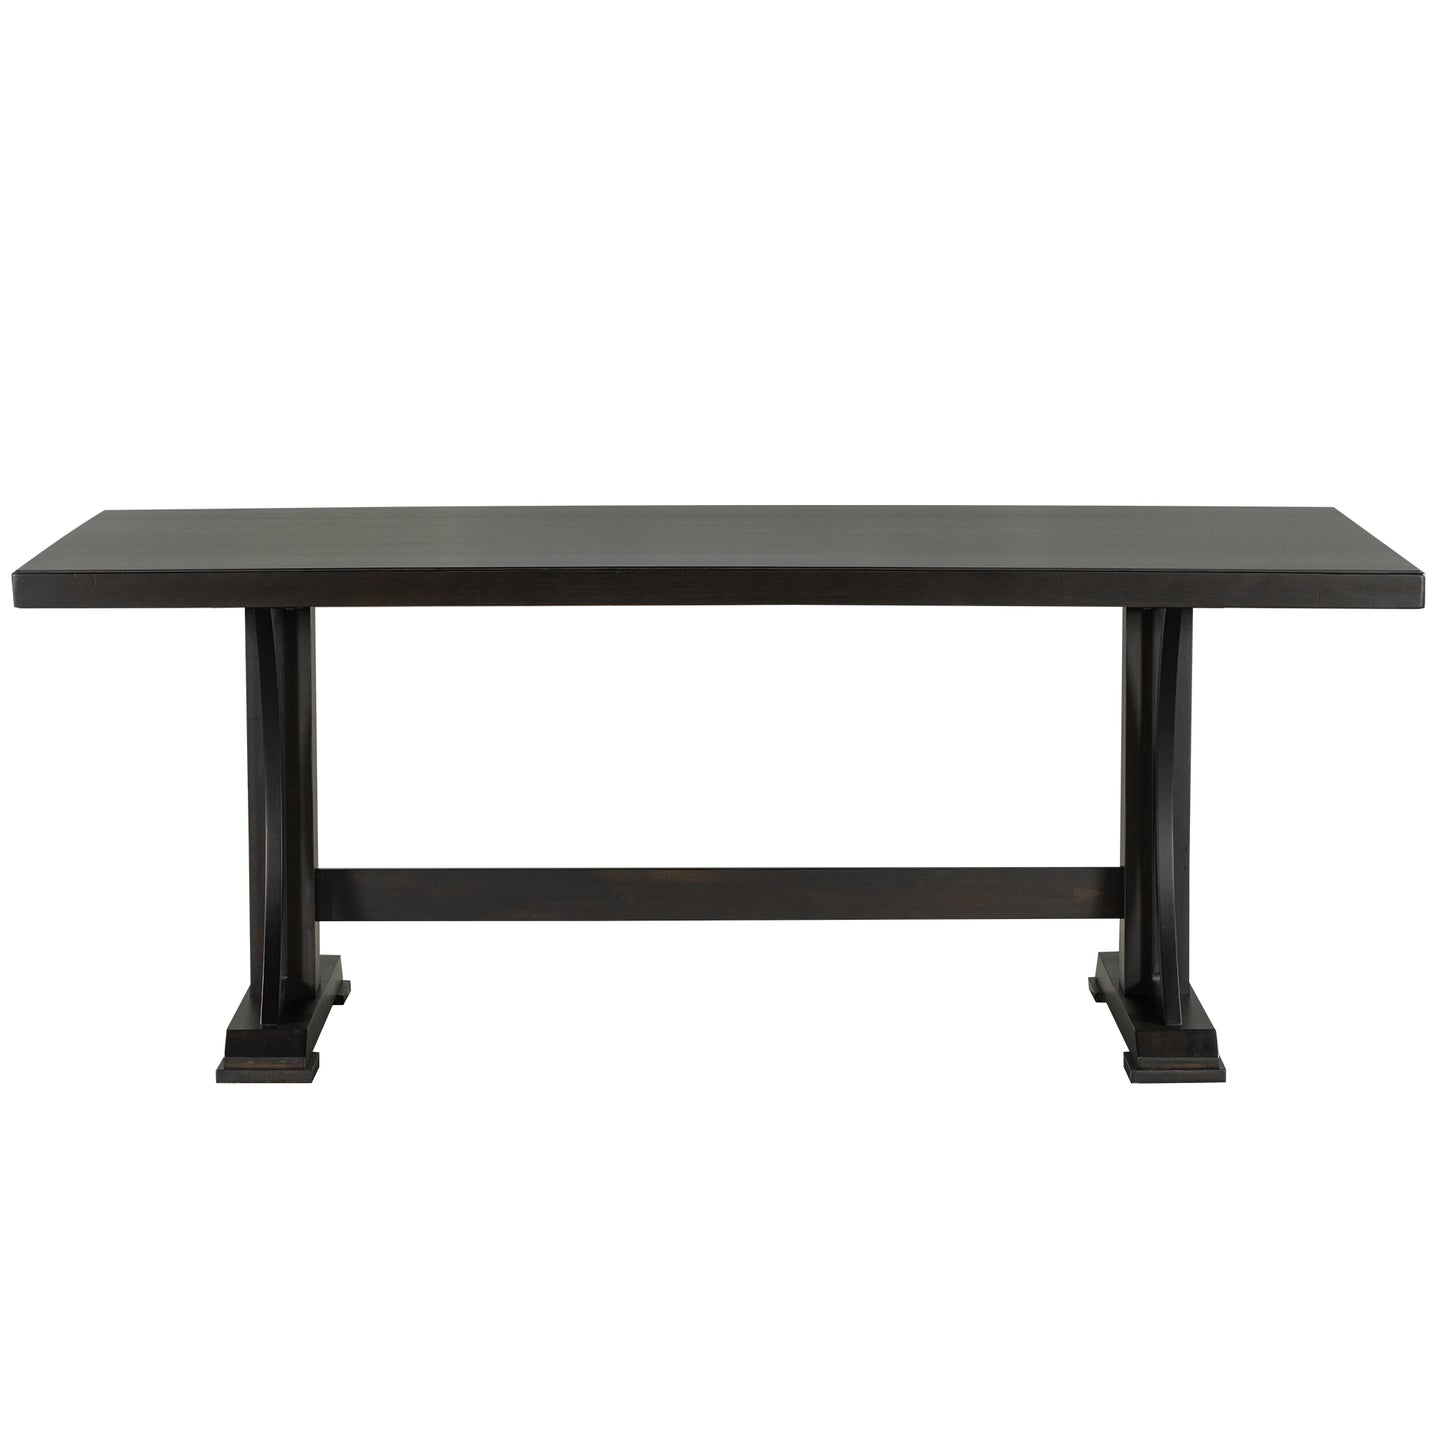 TREXM Retro Style Dining Table 78"Wood Rectangular Table, Seats up to 8 (Espresso)